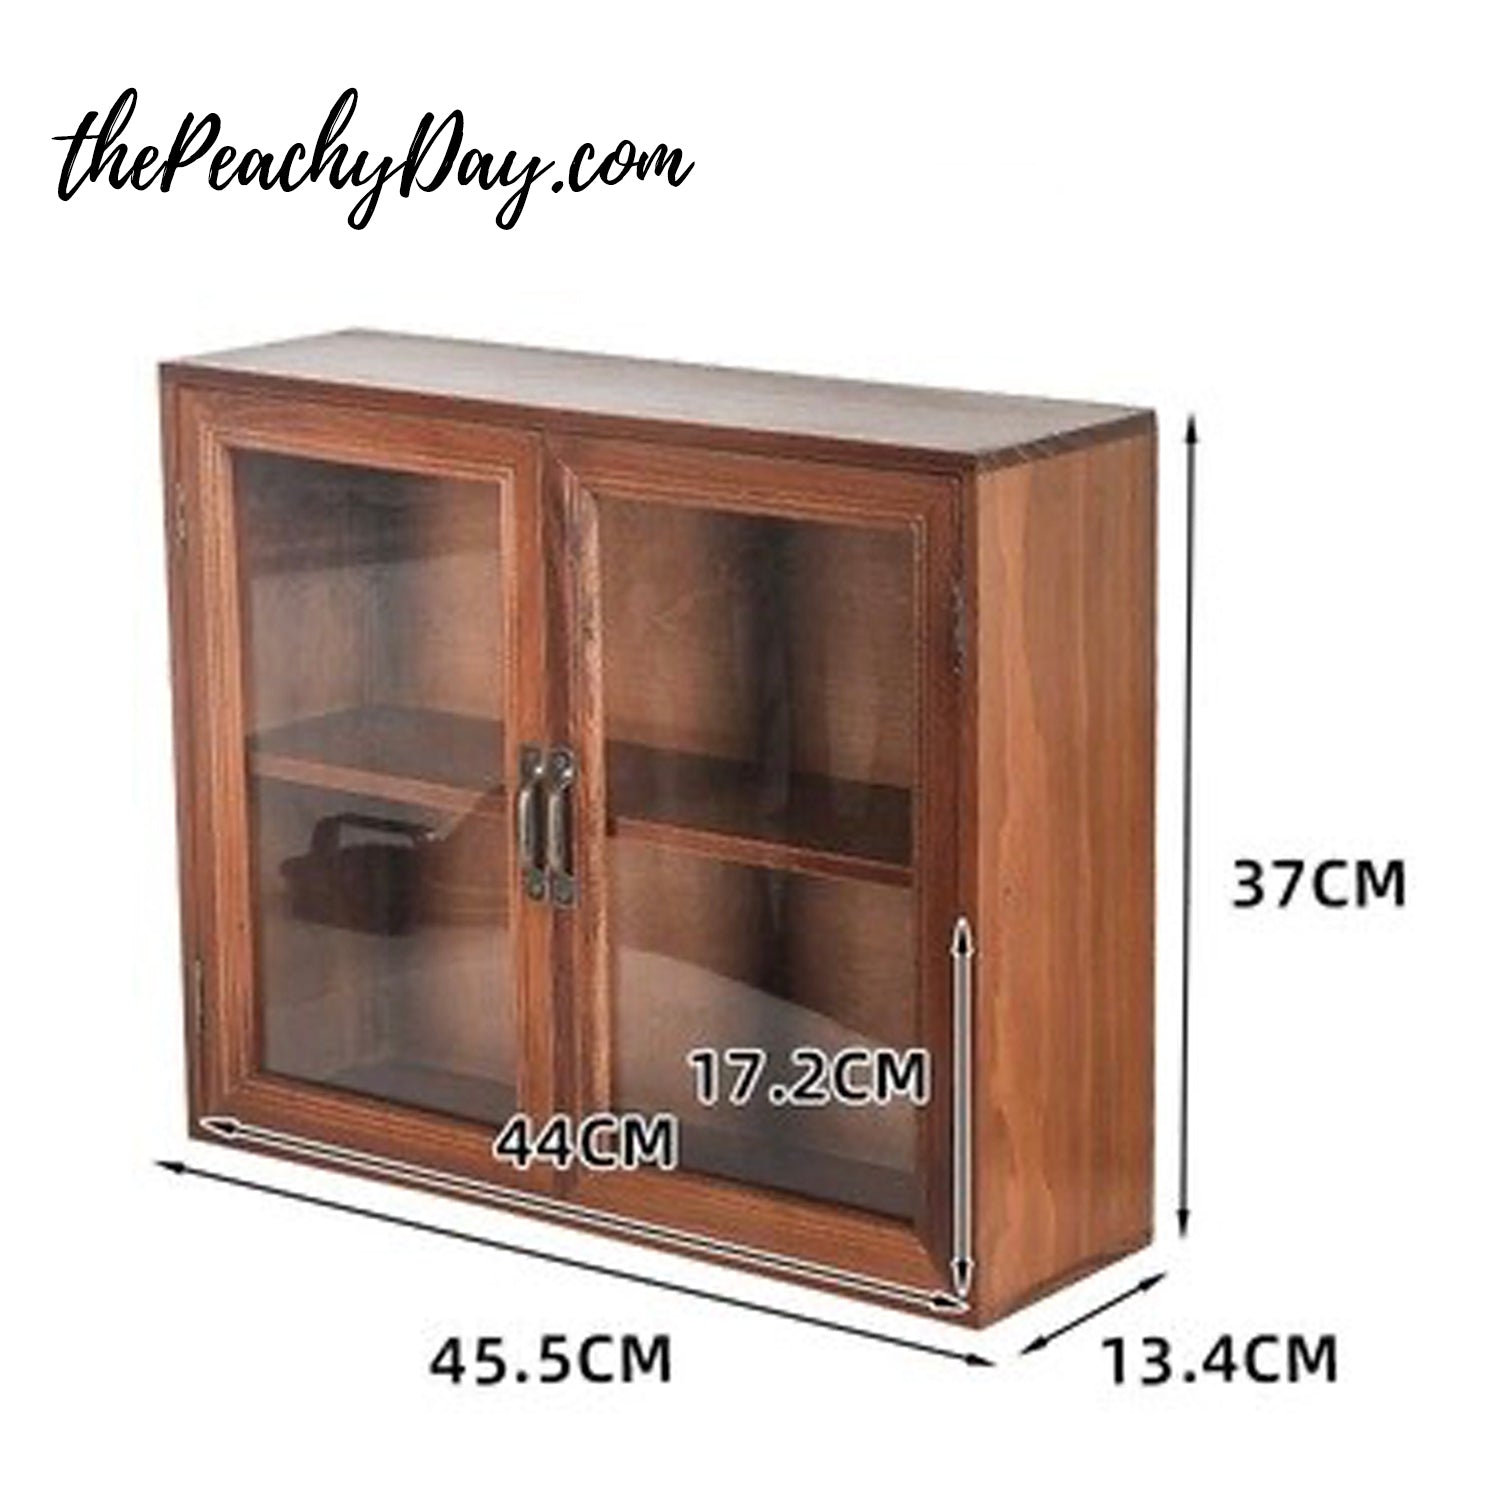 Vintage Wooden Storage Cabinet with Glass Doors Vintage Wooden Cabinet with Glass Lid Case Organizer Storage Display Cabinet for Mini Funko Pop Figures Wooden Display Cabinet Collectible Display Shelves Box